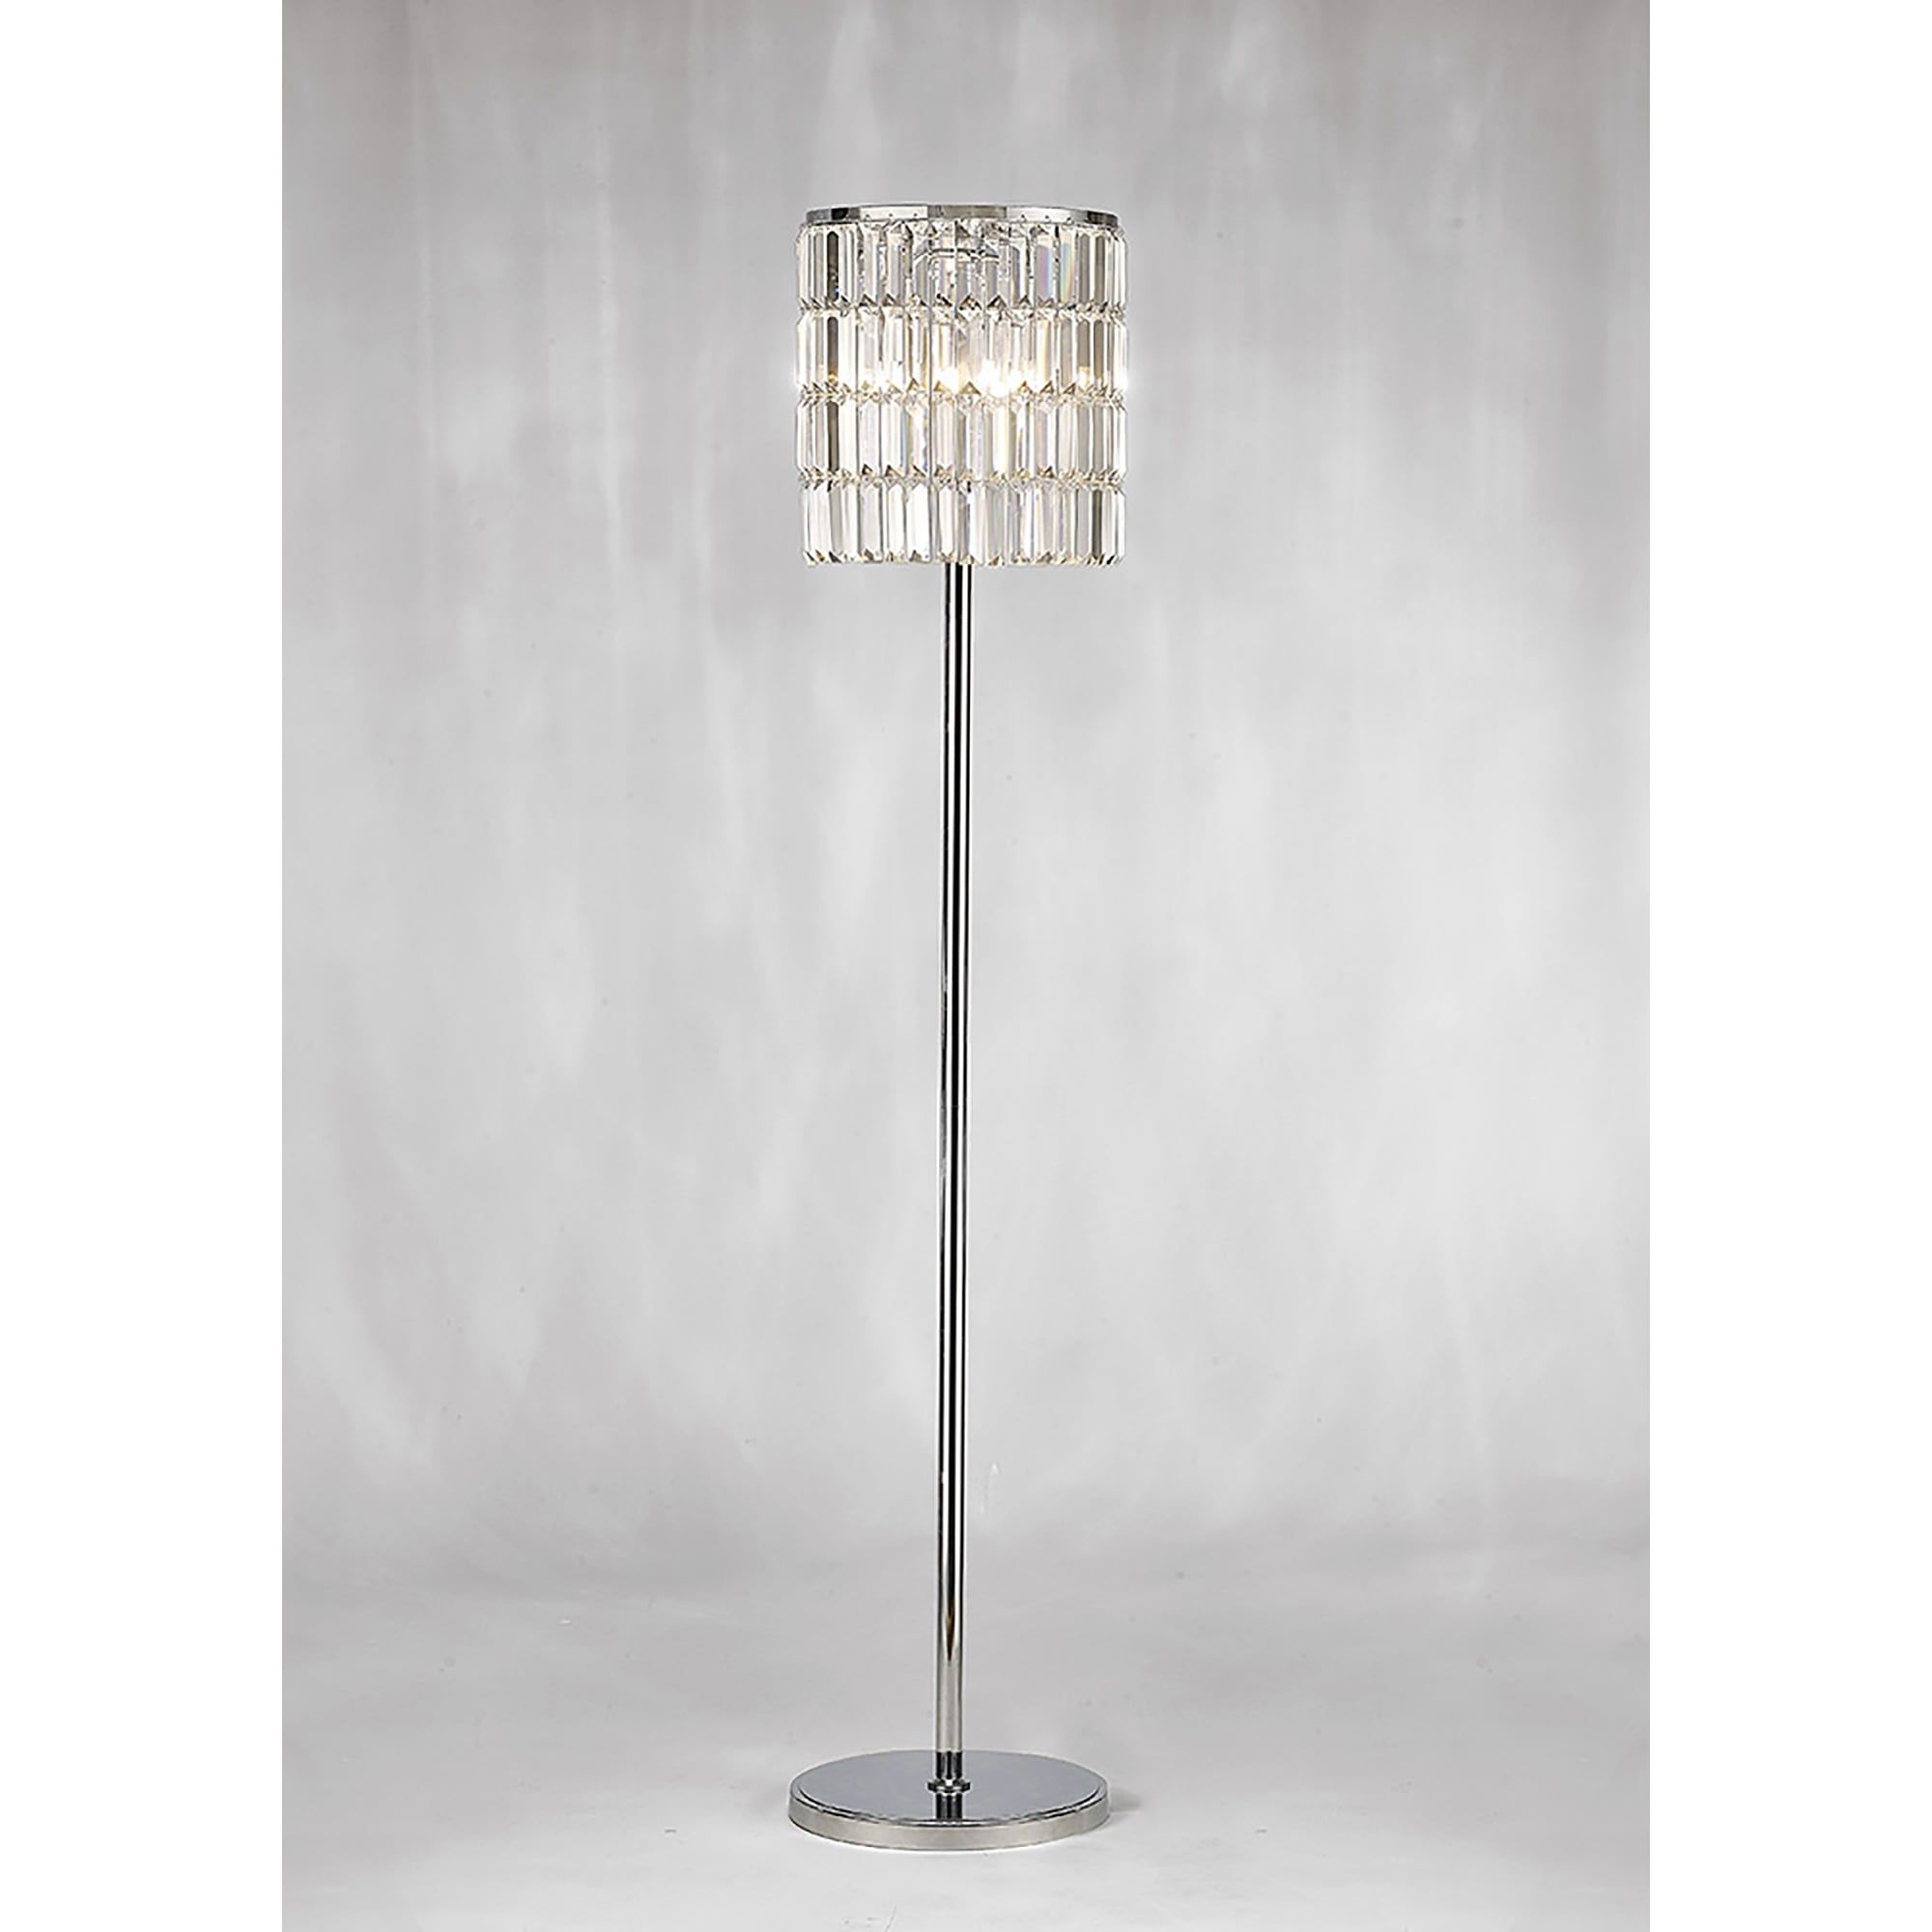 Recent Diyas Il30179 Torre 5 Light Floor Lamp With Polished Chrome Finish And  Crystal Rods N18035 – Indoor Lighting From Castlegate Lights Uk Regarding Chrome Crystal Tower Standing Lamps (View 8 of 10)